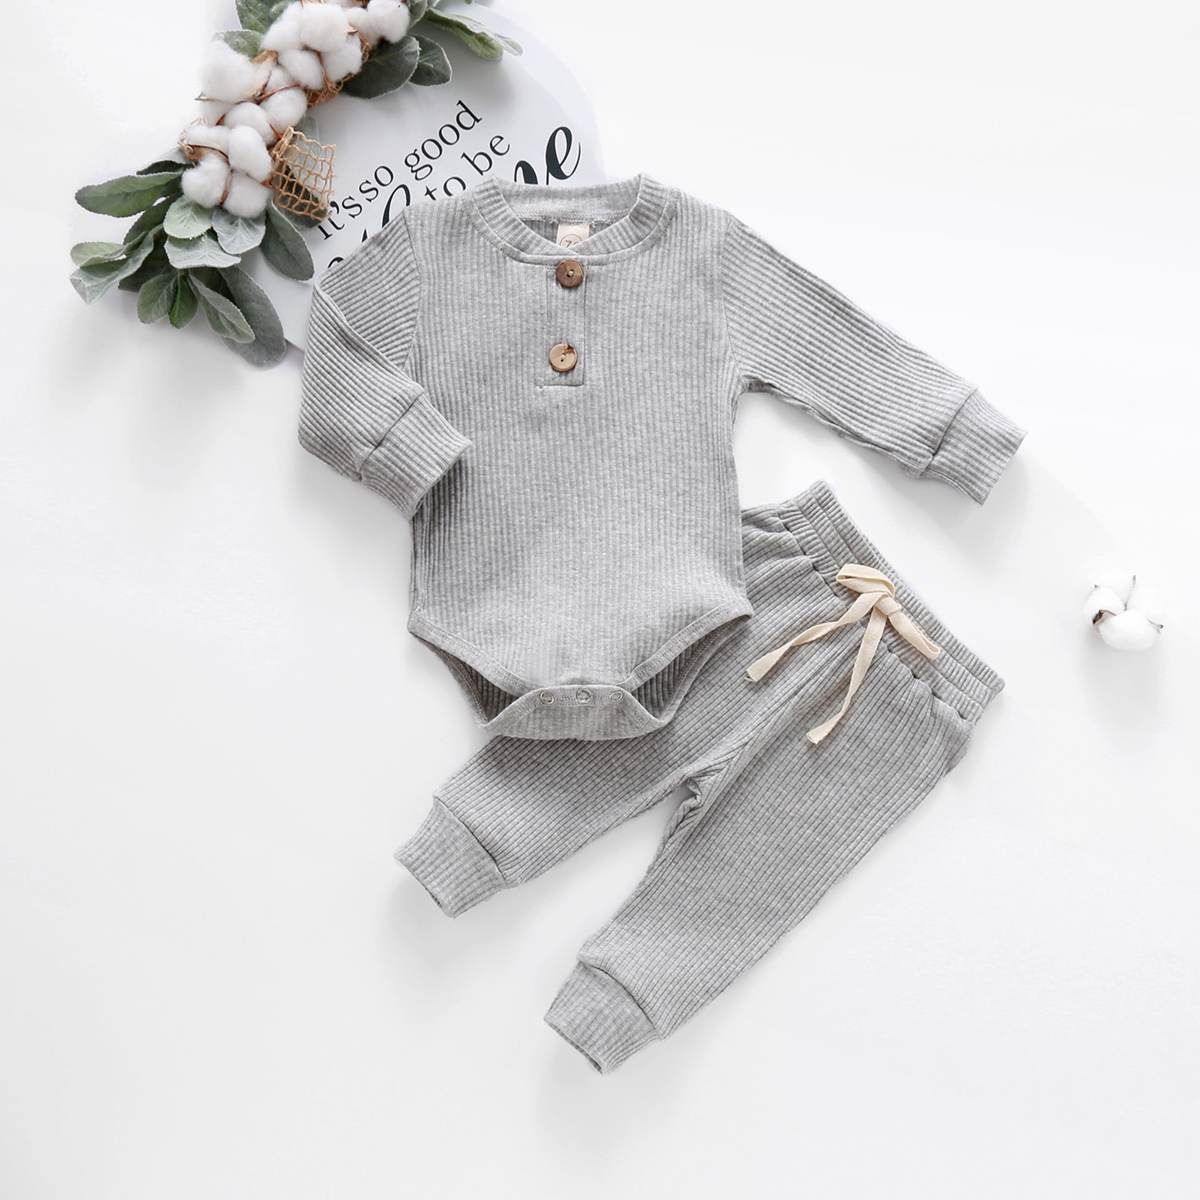 Infant Newborn Baby Girl Boy Spring Autumn Ribbed/Plaid Solid Clothes Sets Long Sleeve Bodysuits + Elastic Pants 2PCs Outfits